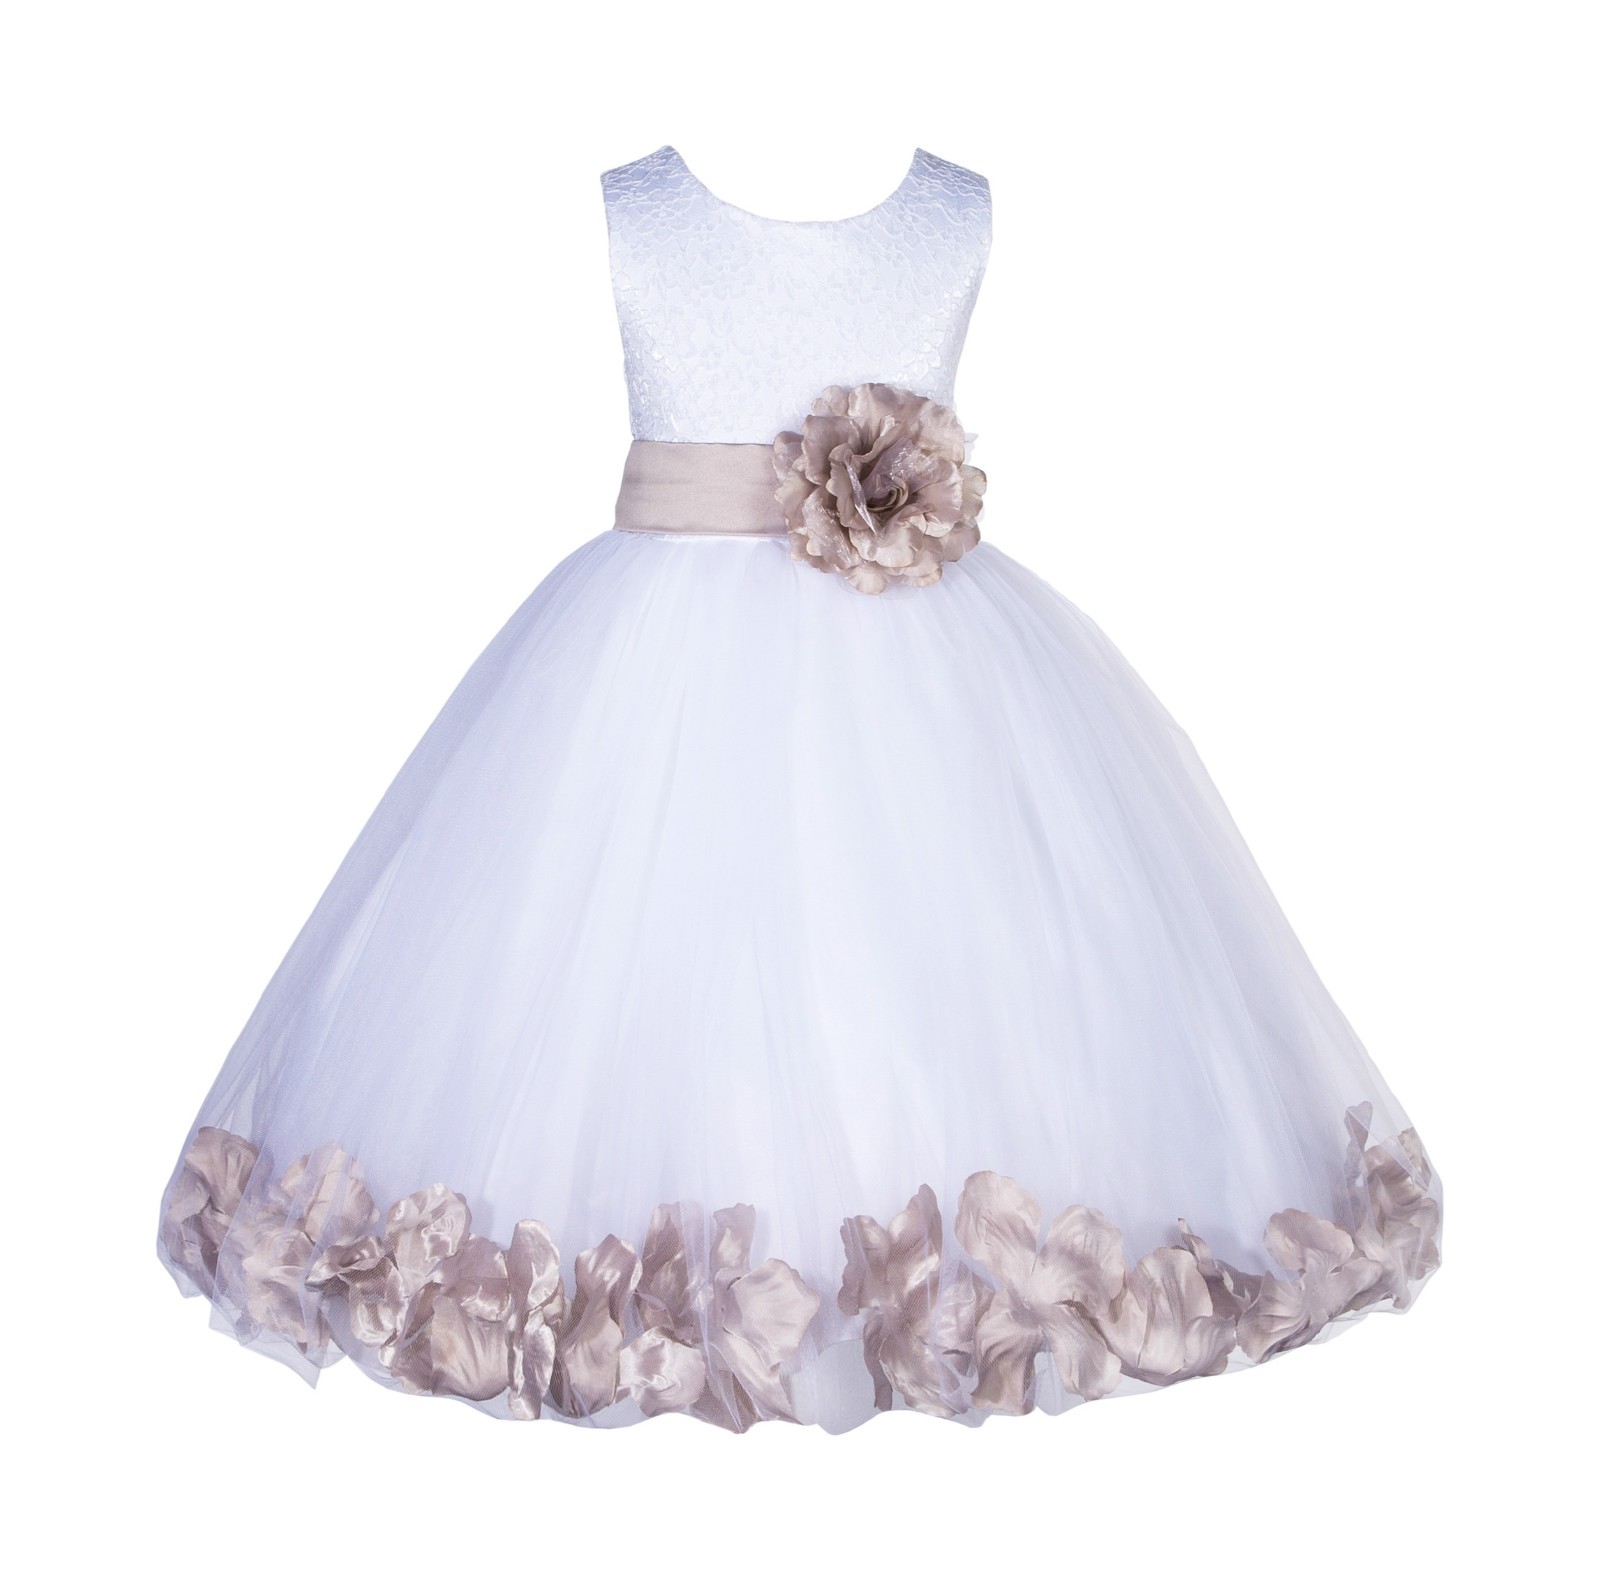 White/Biscotti Lace Top Tulle Floral Petals Flower Girl Dress 165S